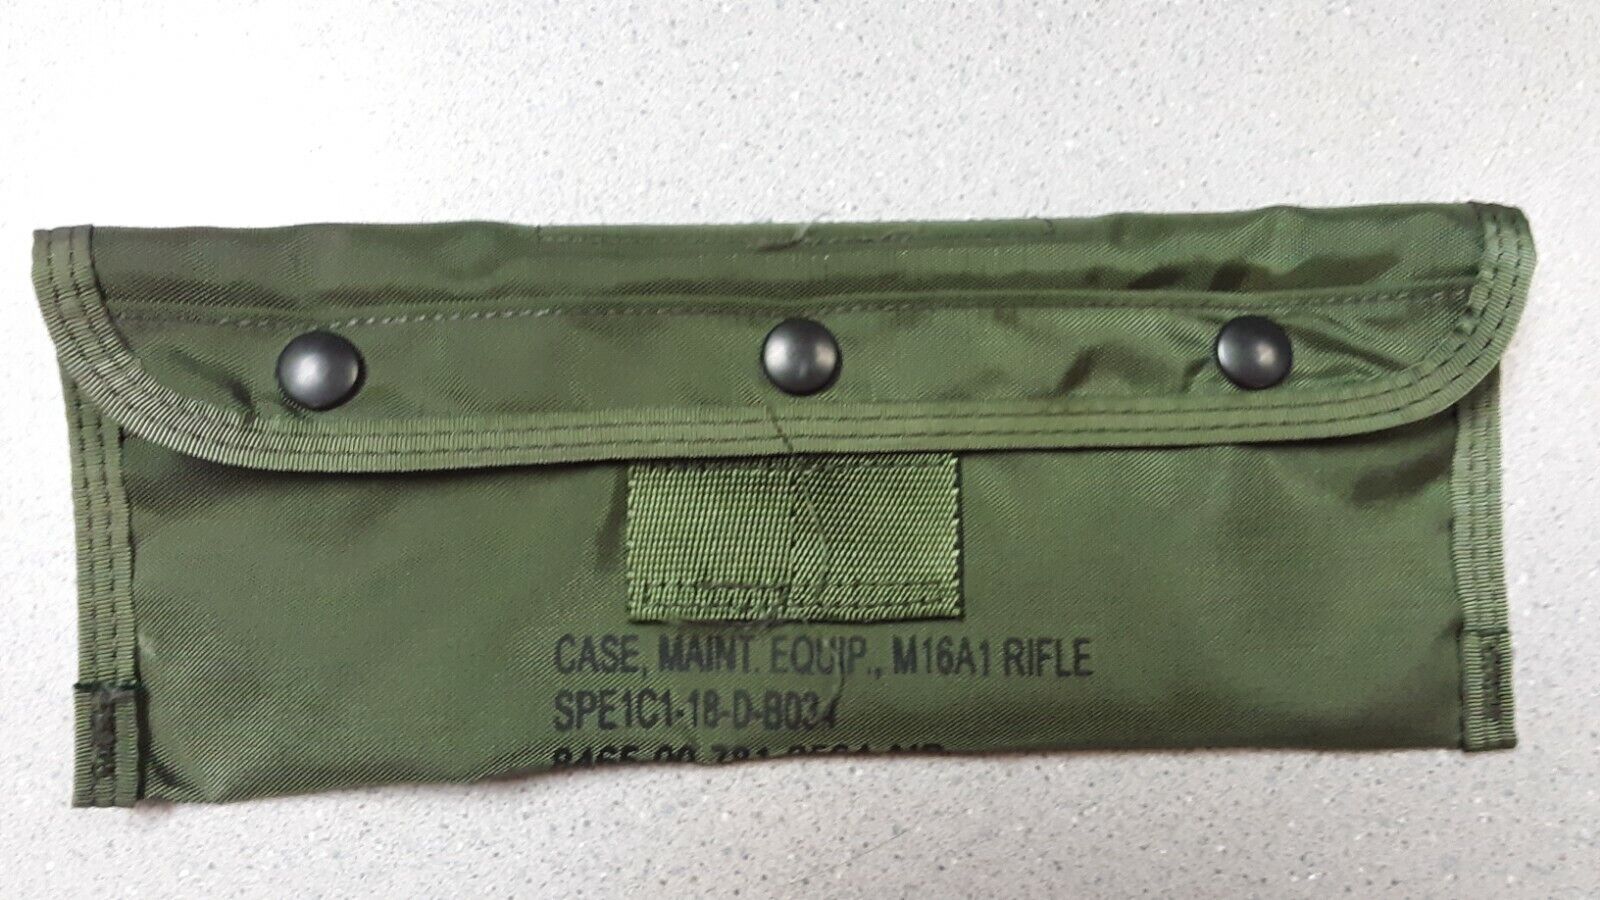 M-16 Army Rifle Maintenance Cleaning Kit Pouch Only 9465-00-781-9564 NEW 